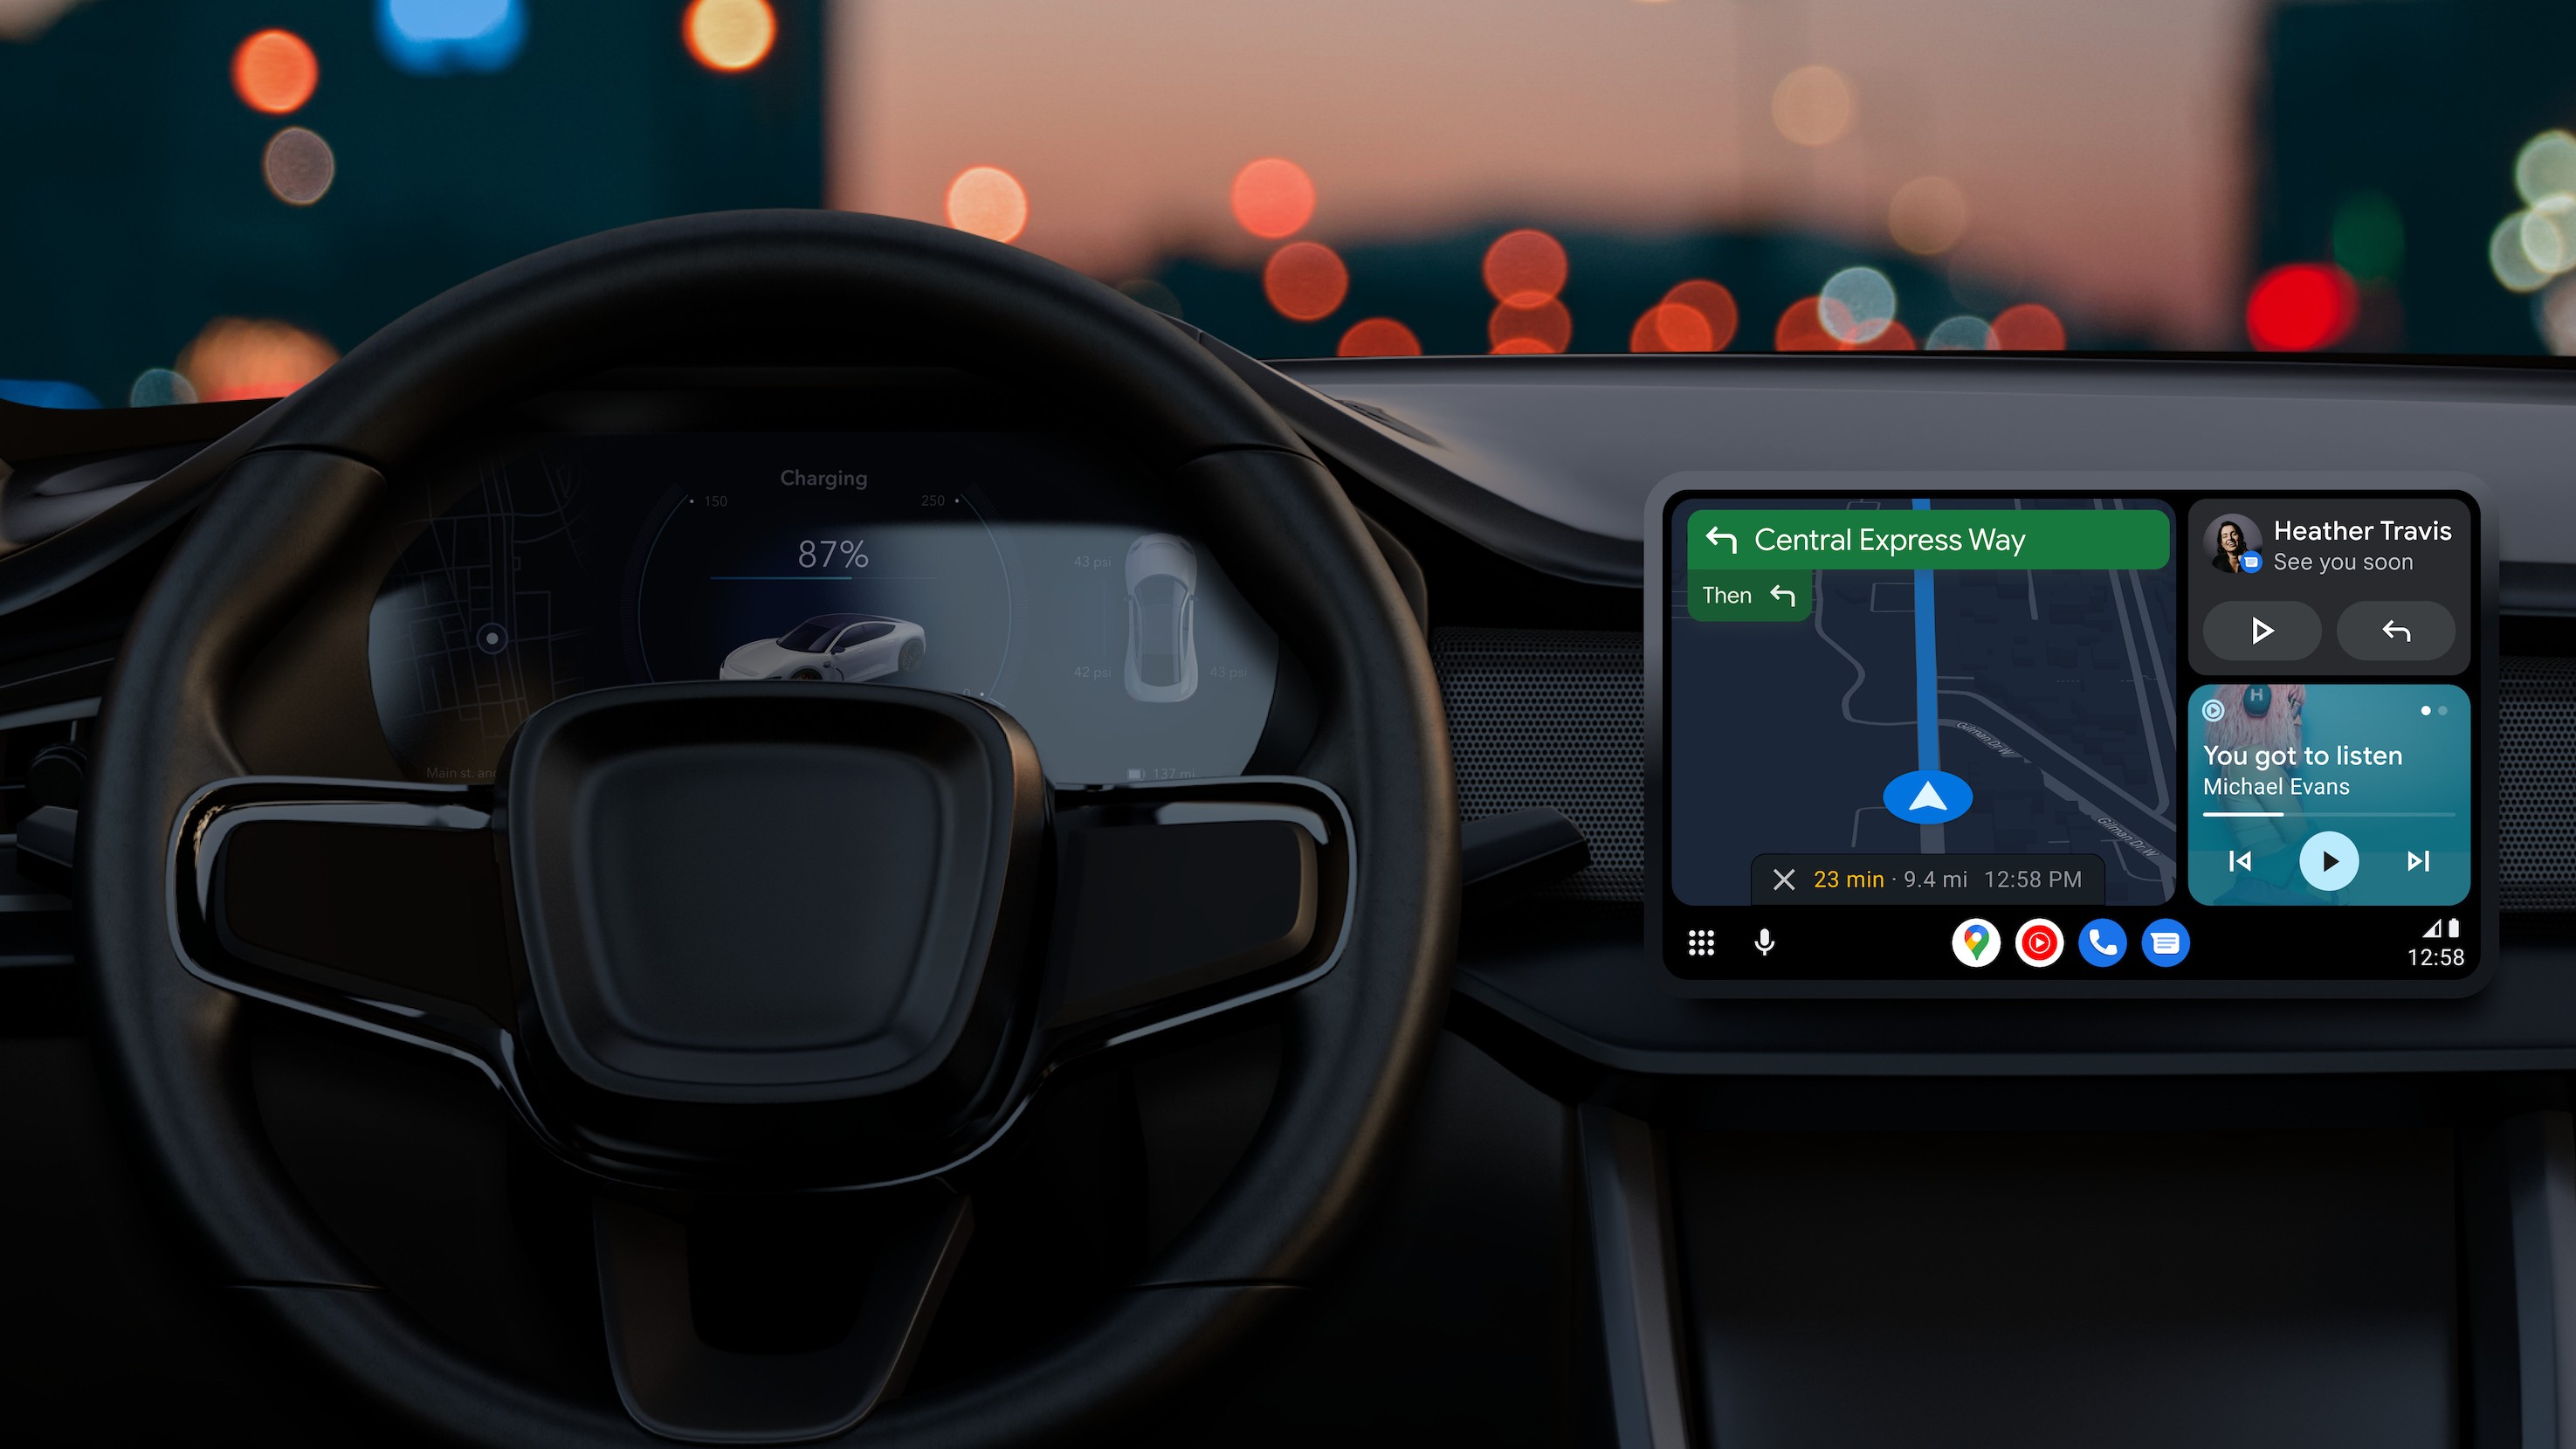 Tips on how to use Android Auto in the car